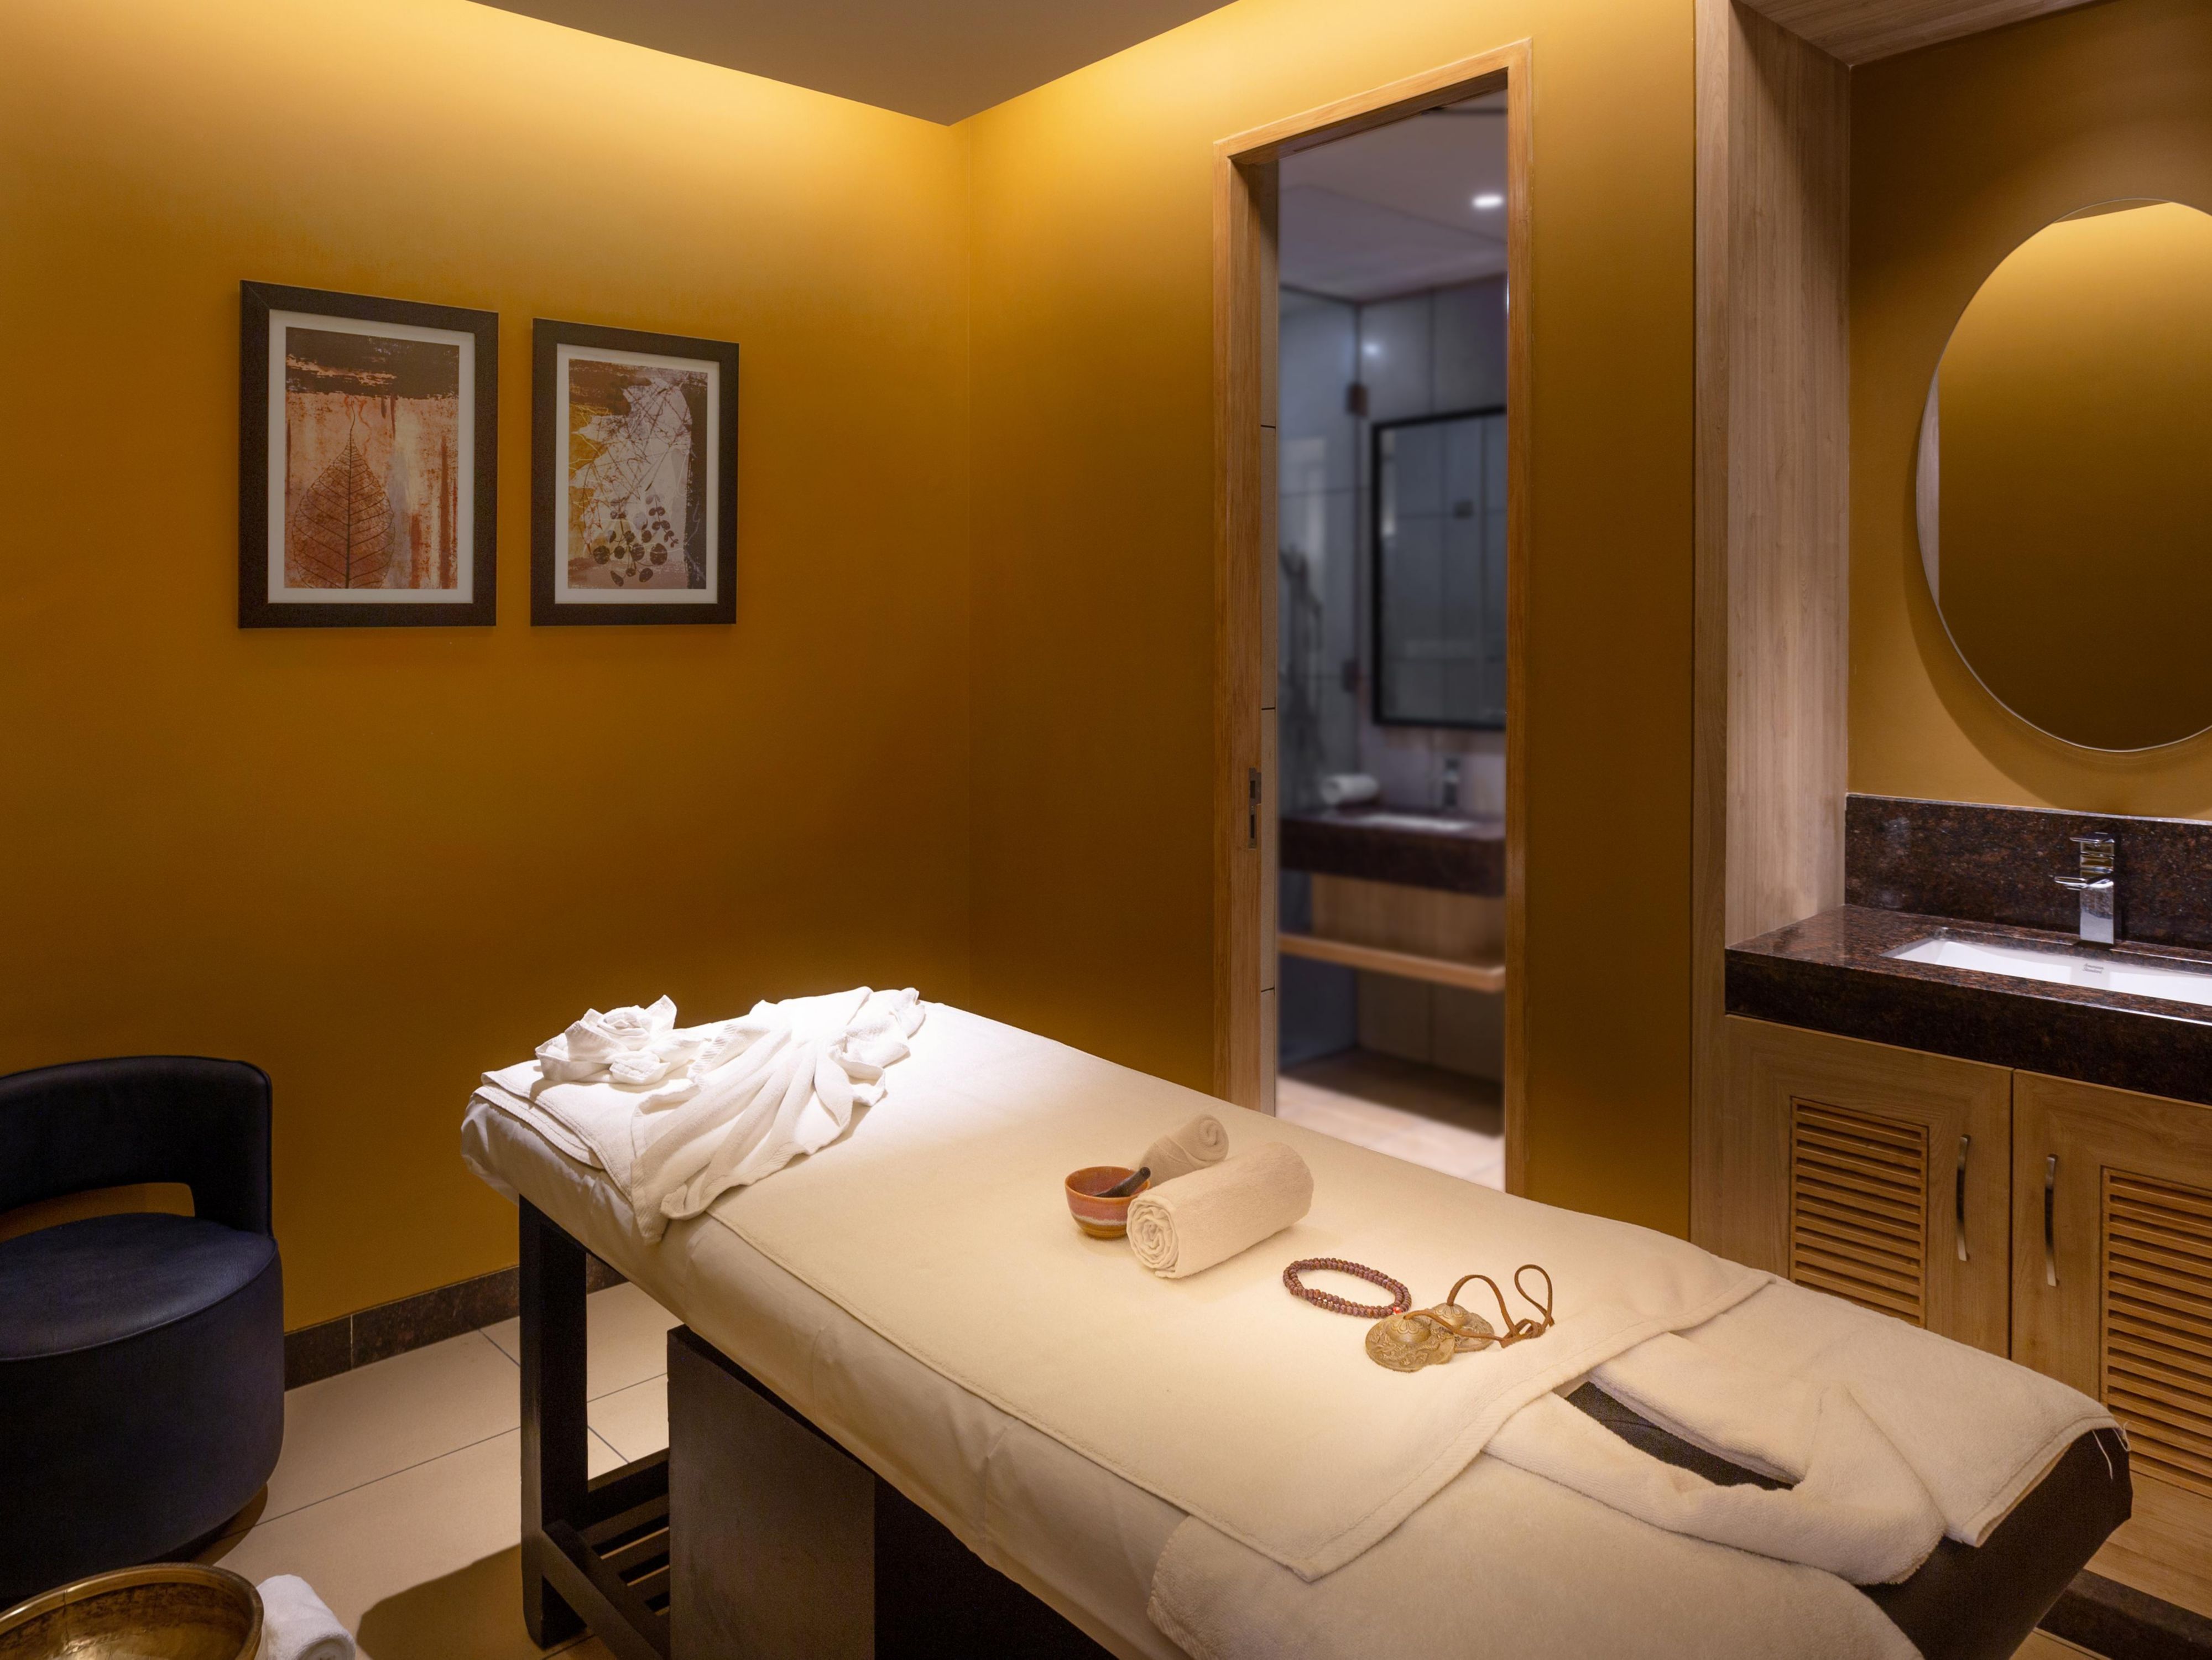 Meghavi has a world class spa which is located on first floor of the hotel. From Kansa Wand Massage, Hot Stone massage, Warm Bamboo massage, Herbal Potli massage to the Classical massages like Deep Tissue Balinese Swedish Aromatherapy Foot Reflexology Body Scrubs Wraps and Facials.